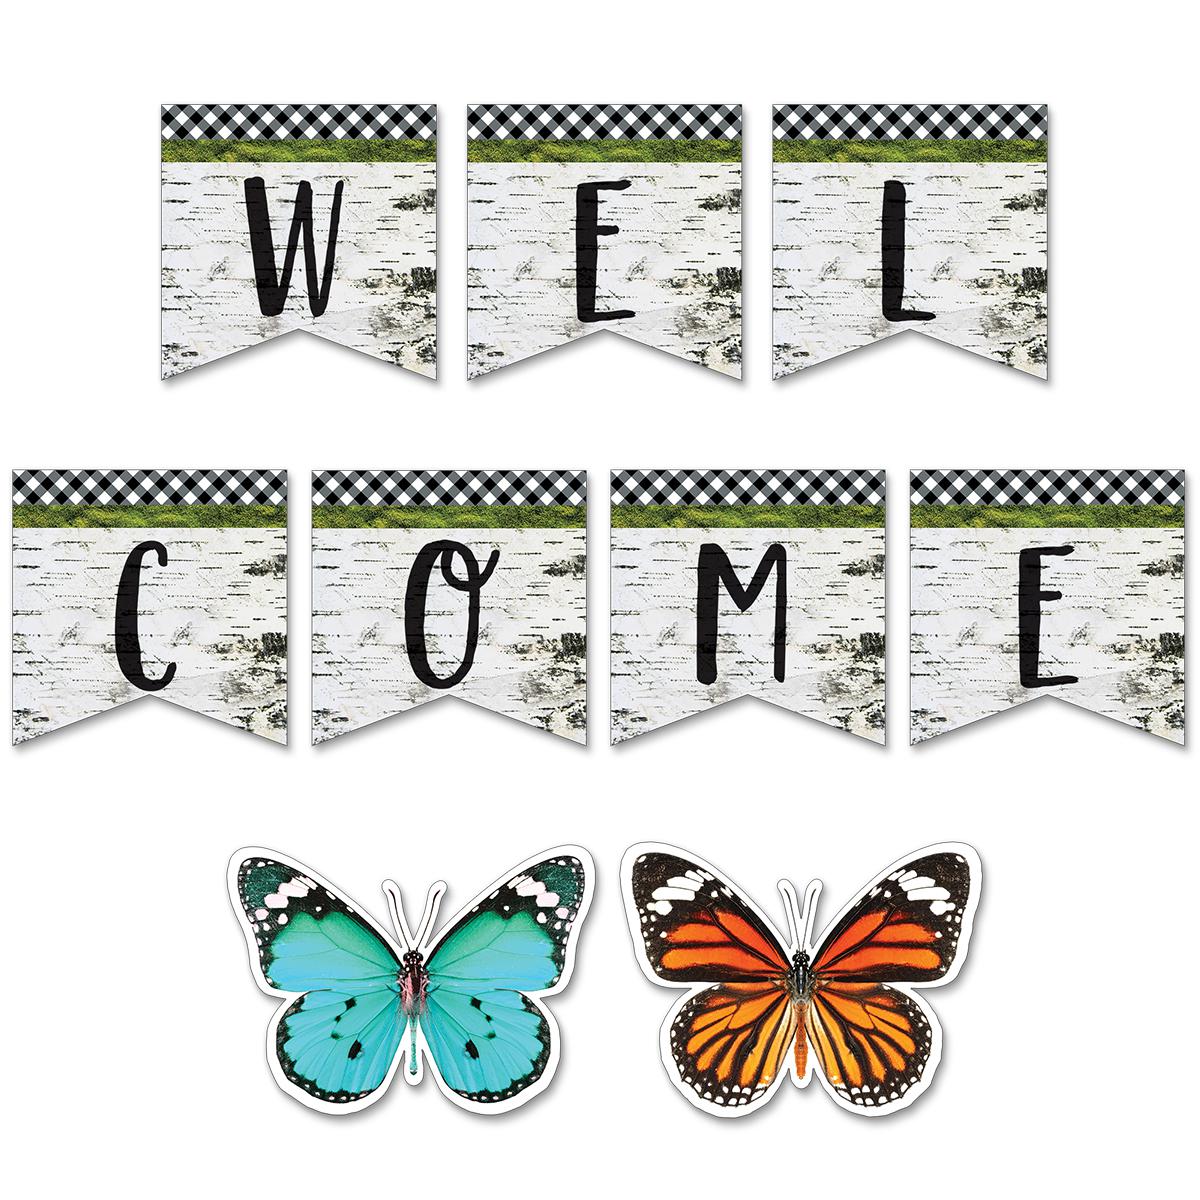  Woodland Whimsy Welcome Bulletin Board Set 